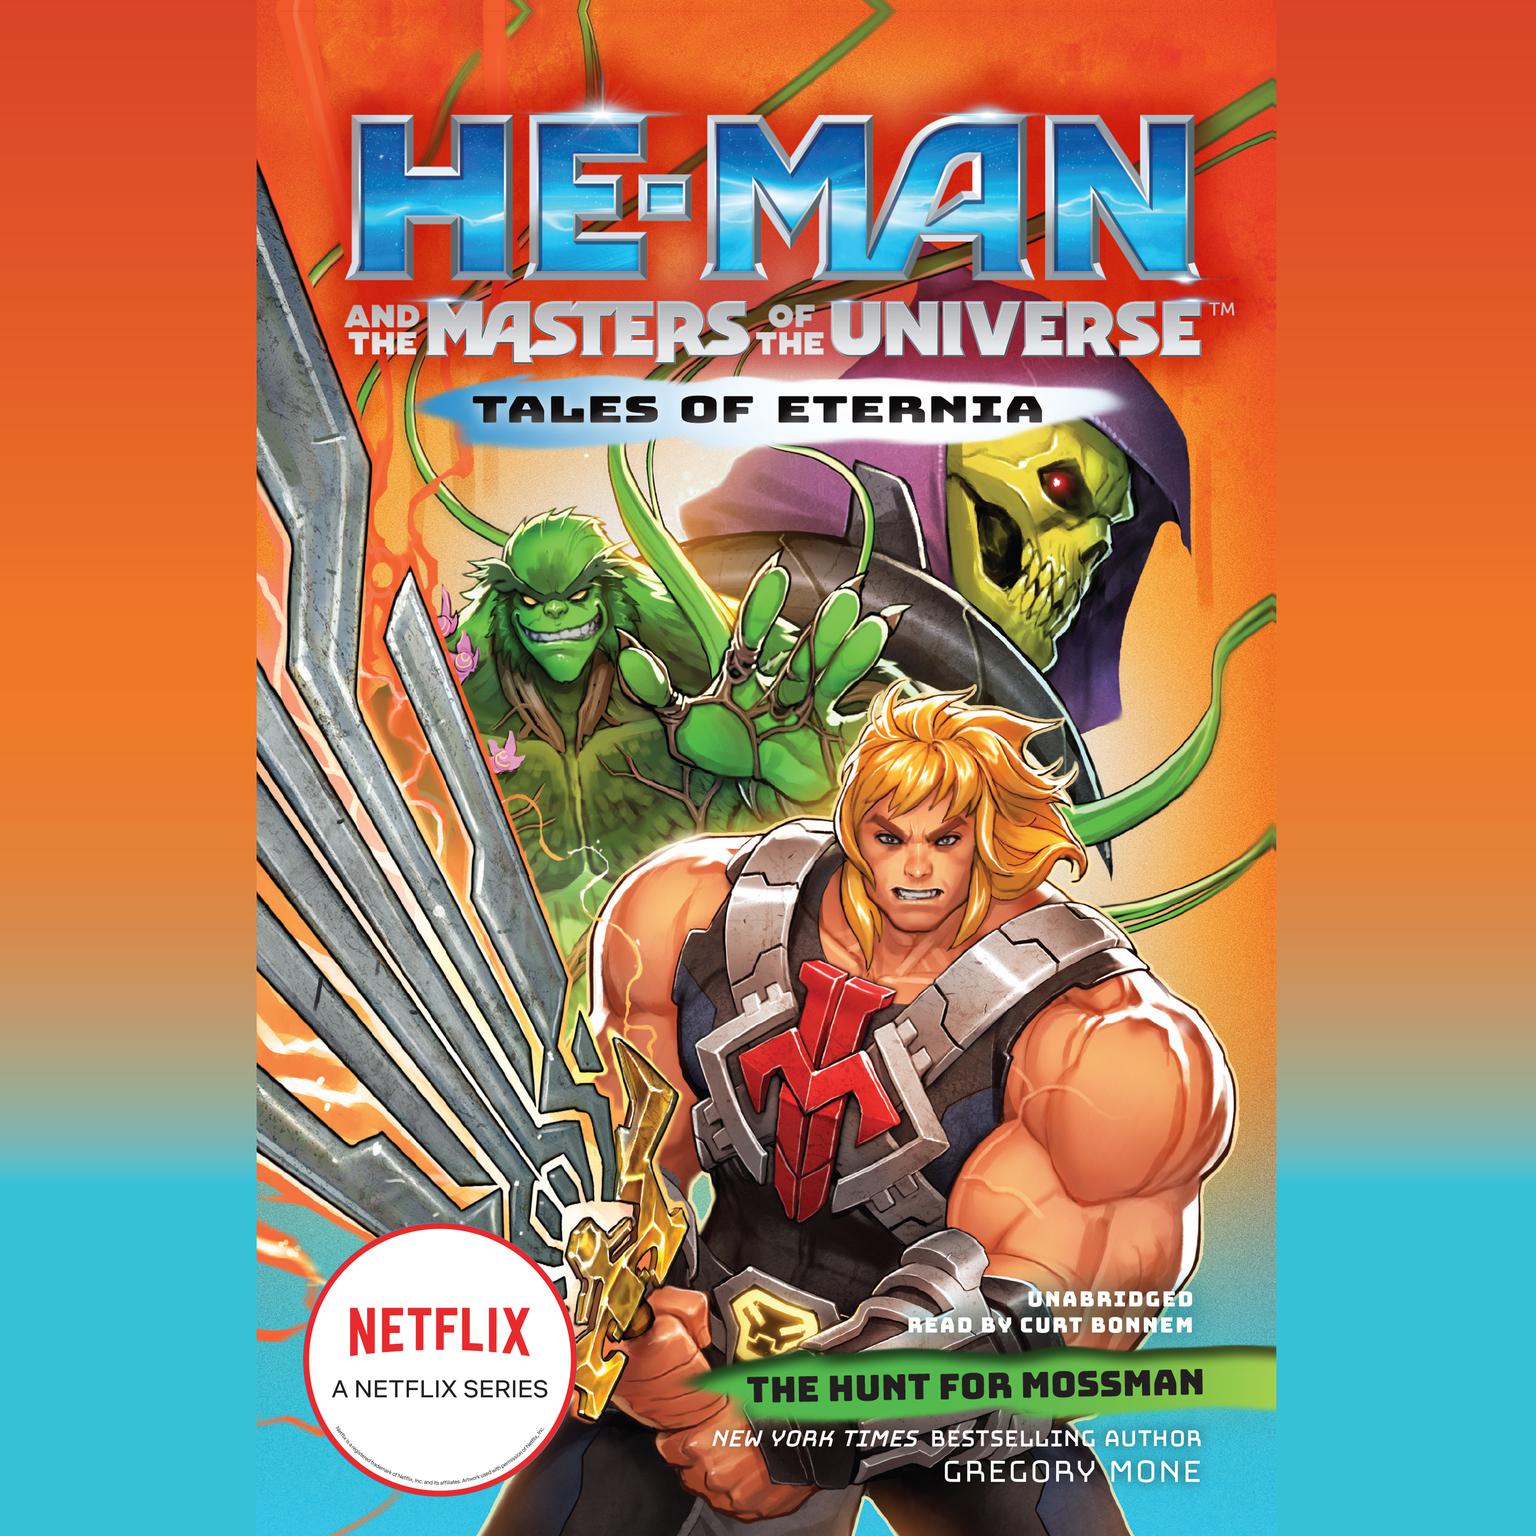 He-Man and the Masters of the Universe: The Hunt for Moss Man Audiobook, by Gregory Mone